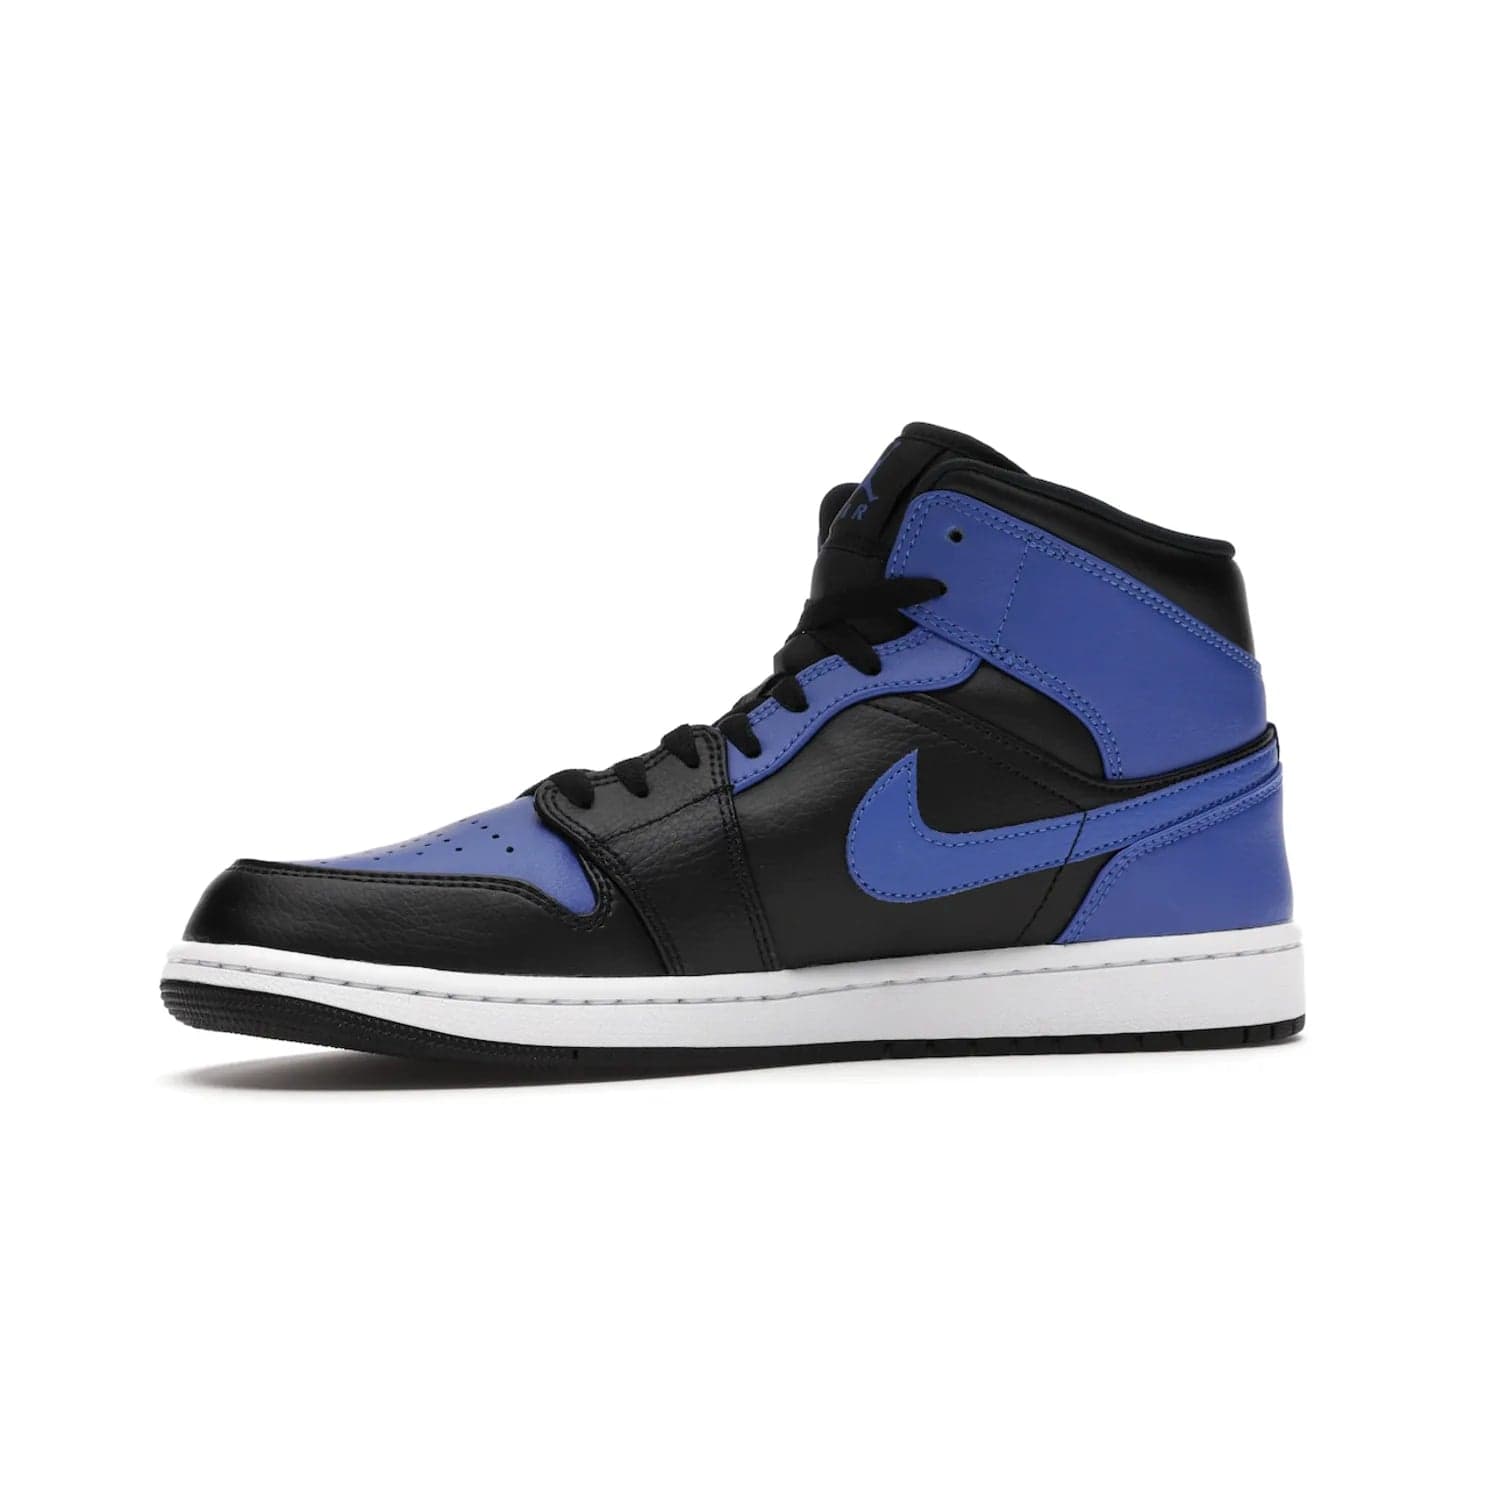 Jordan 1 Mid Hyper Royal Tumbled Leather - Image 17 - Only at www.BallersClubKickz.com - Iconic colorway of the Air Jordan 1 Mid Black Royal Tumbled Leather. Features a black tumbled leather upper, royal blue leather overlays, white midsole & black rubber outsole. Released December 2020. Adds premium style to any collection.